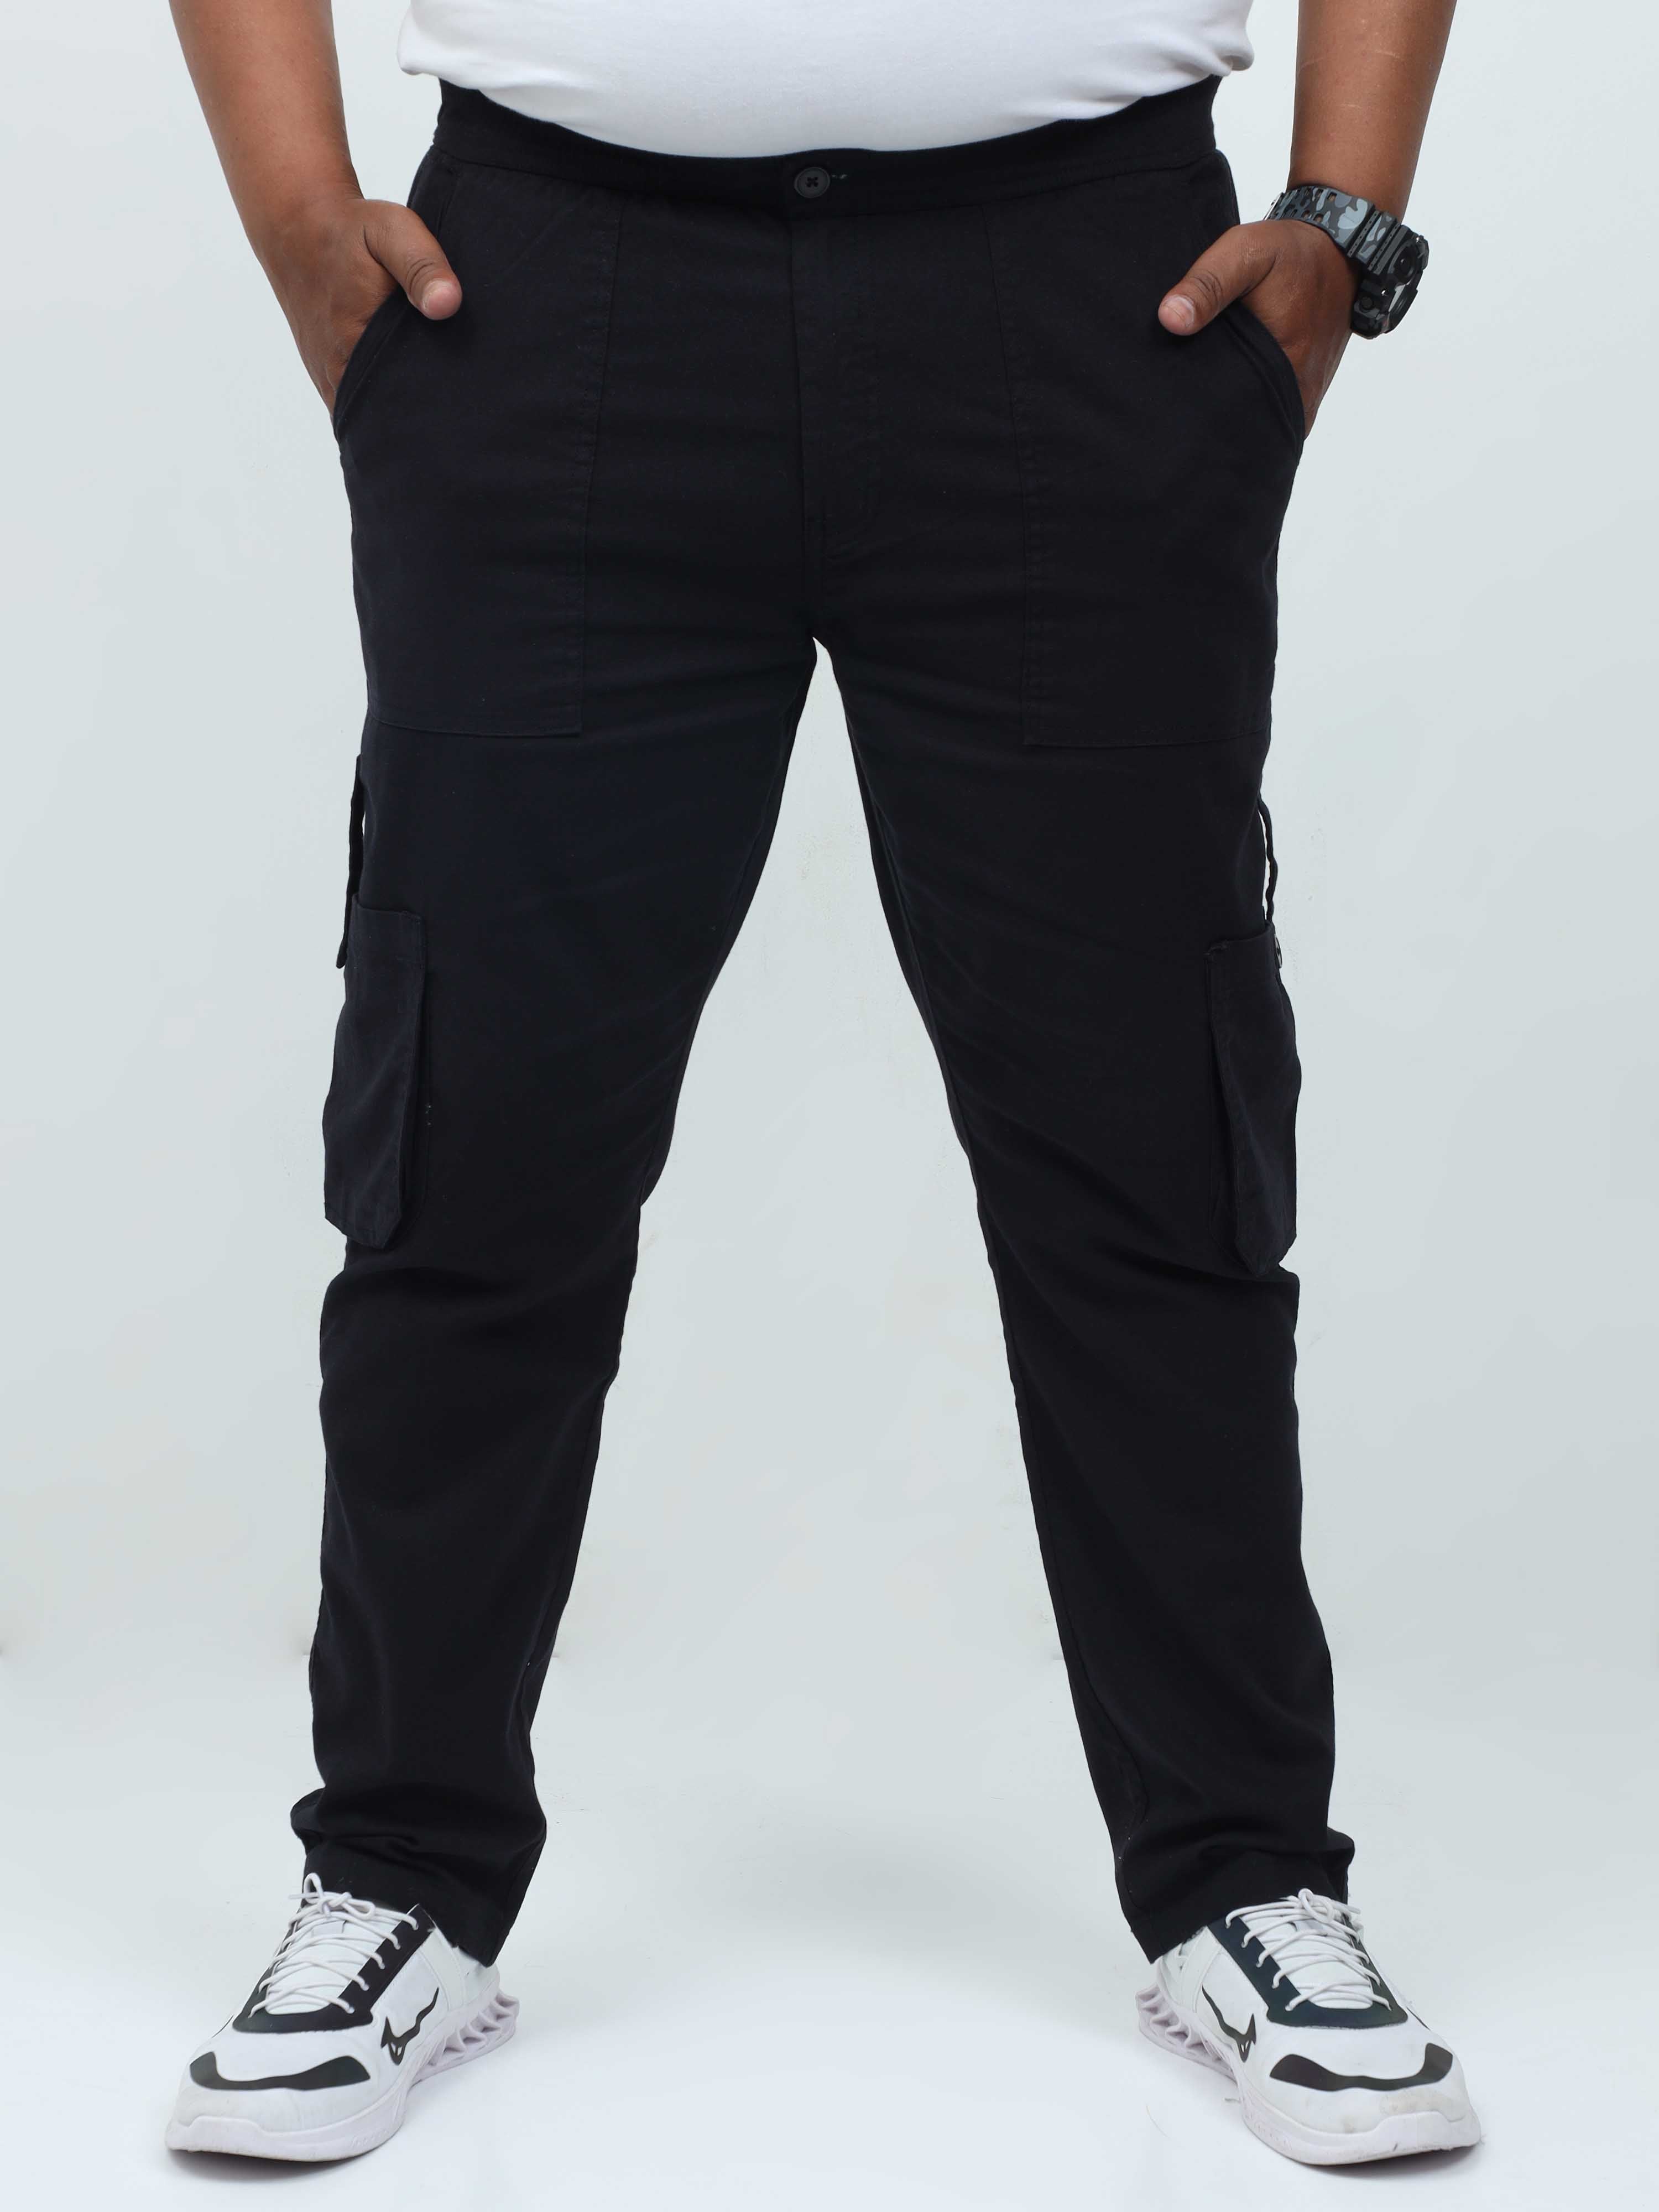 Harajuku Black Cargo Pants For Men And Women Korean Style Fashion High  Waist Streetwear Trousers With Straps For Spring Plus Size Available Style  #220922 From Long01, $15.47 | DHgate.Com